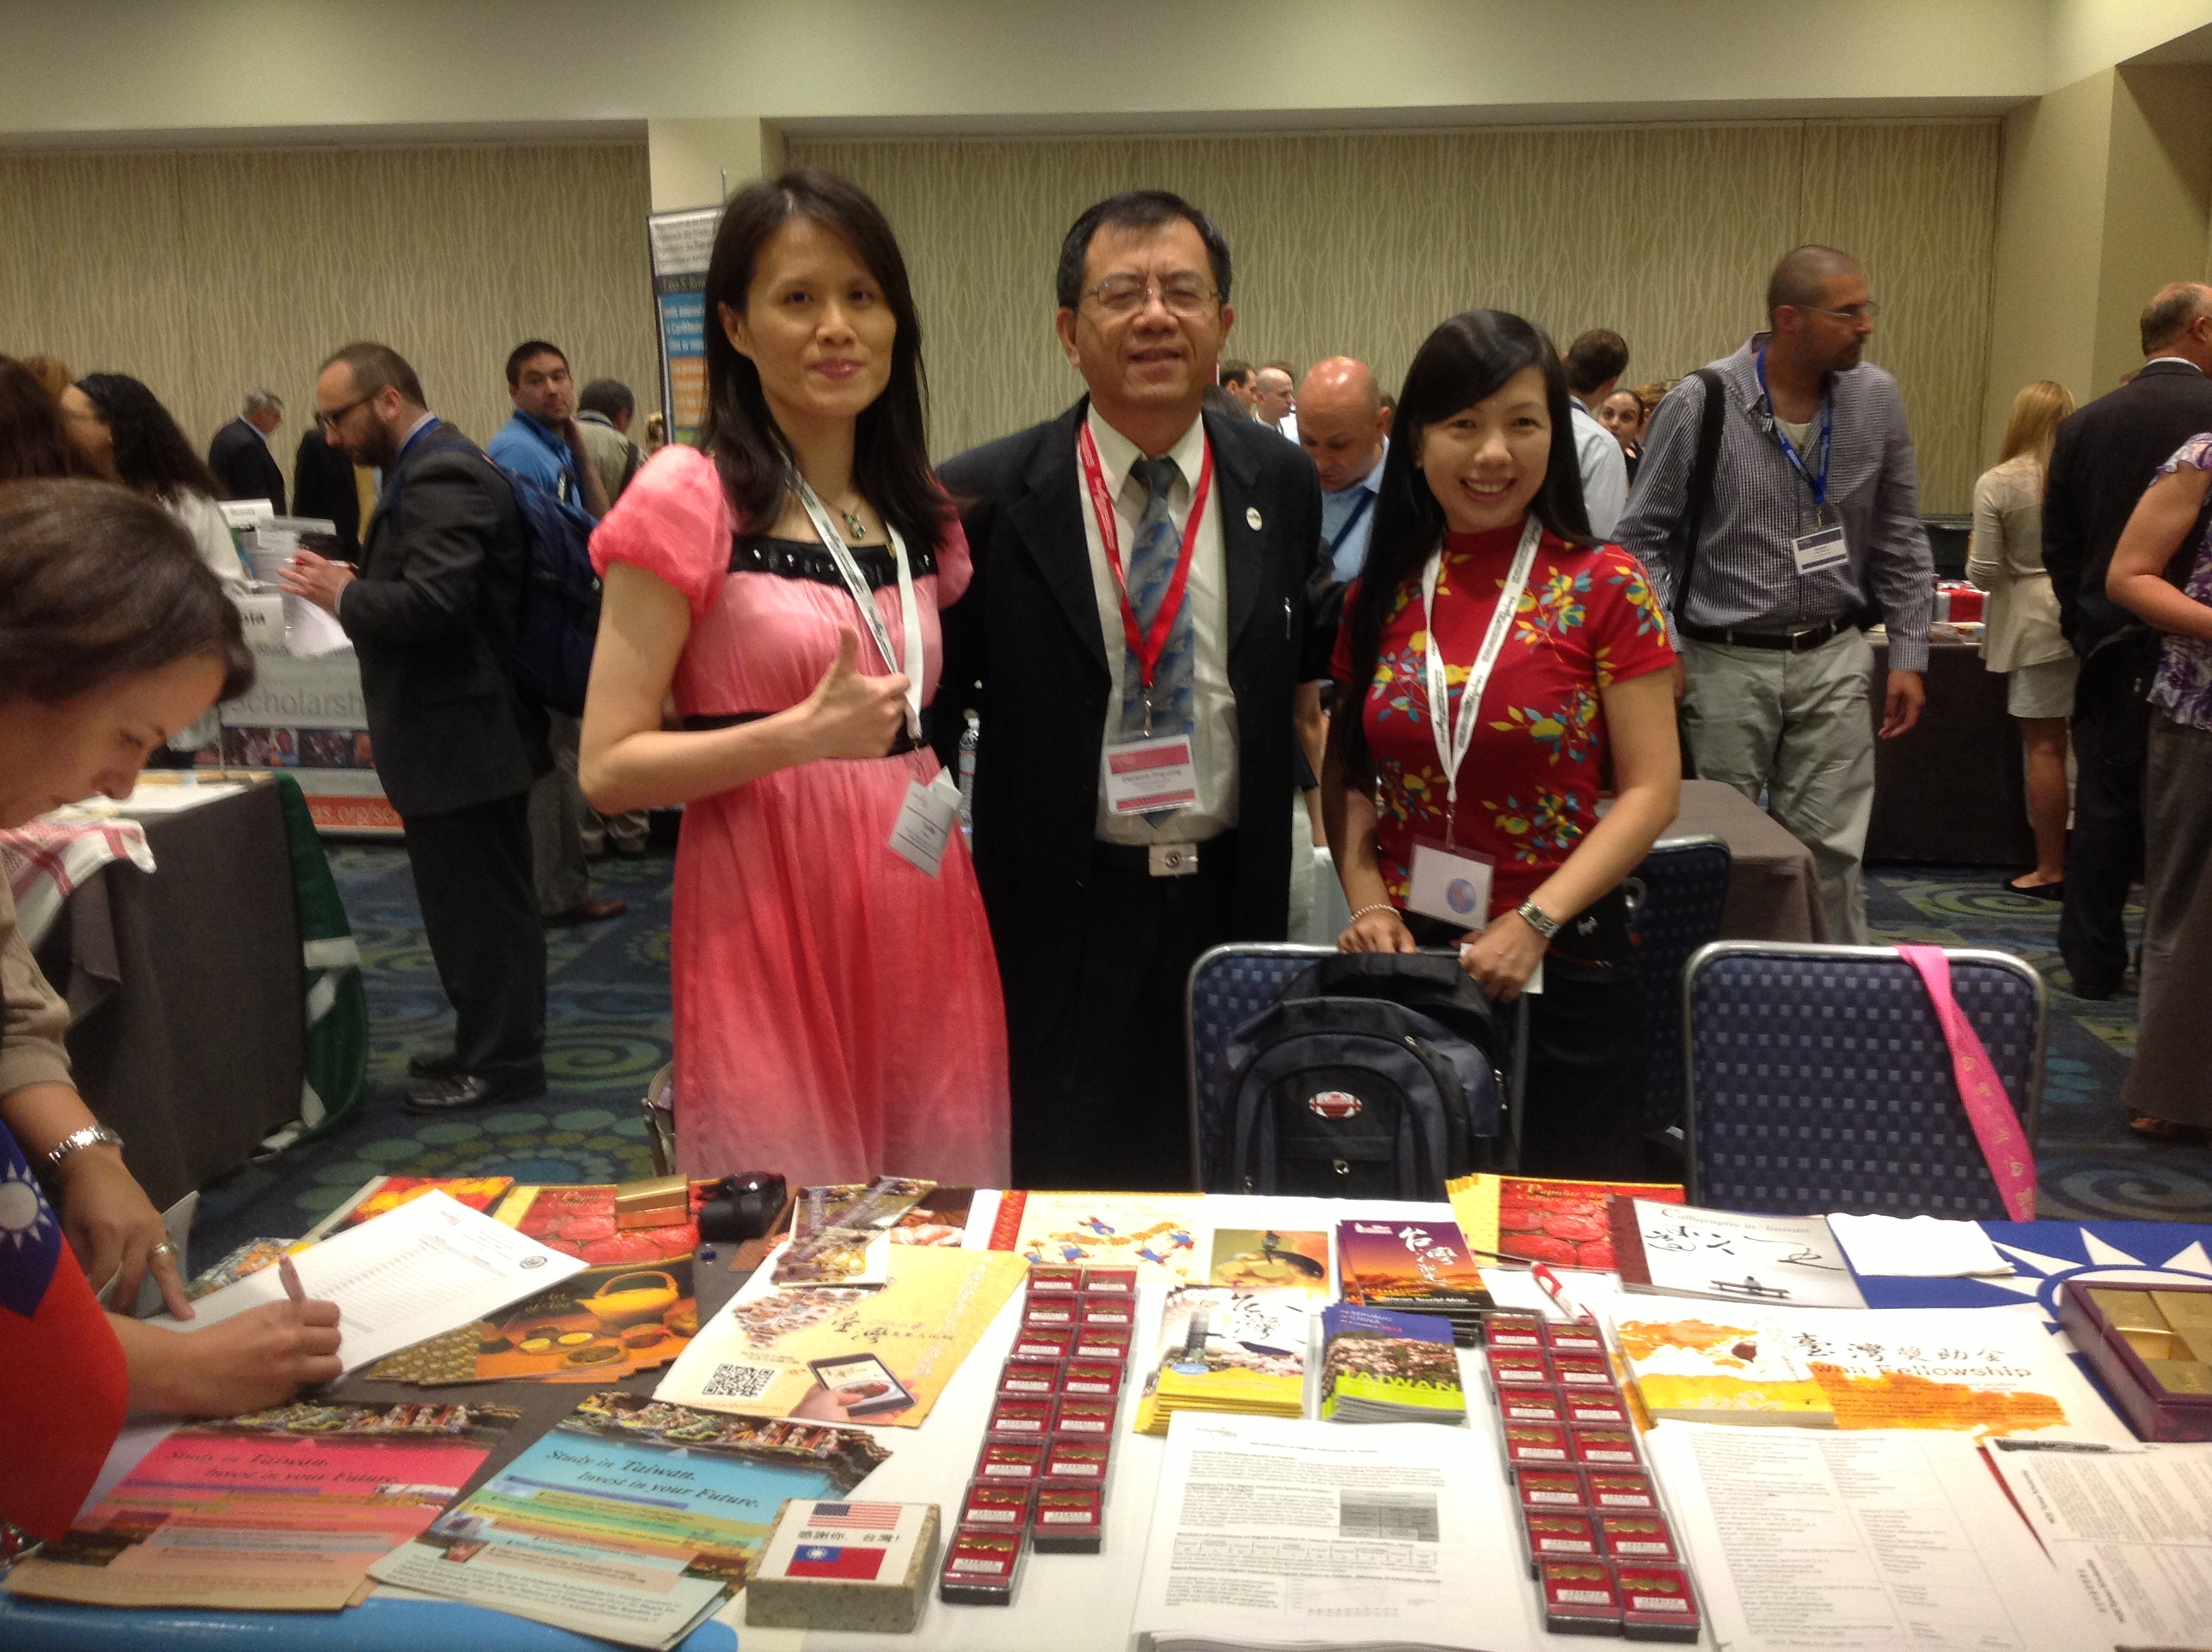 Education Division of TECRO attended the 4th EducationUSA Forum to inform U.S. representatives about Taiwan’s higher education system